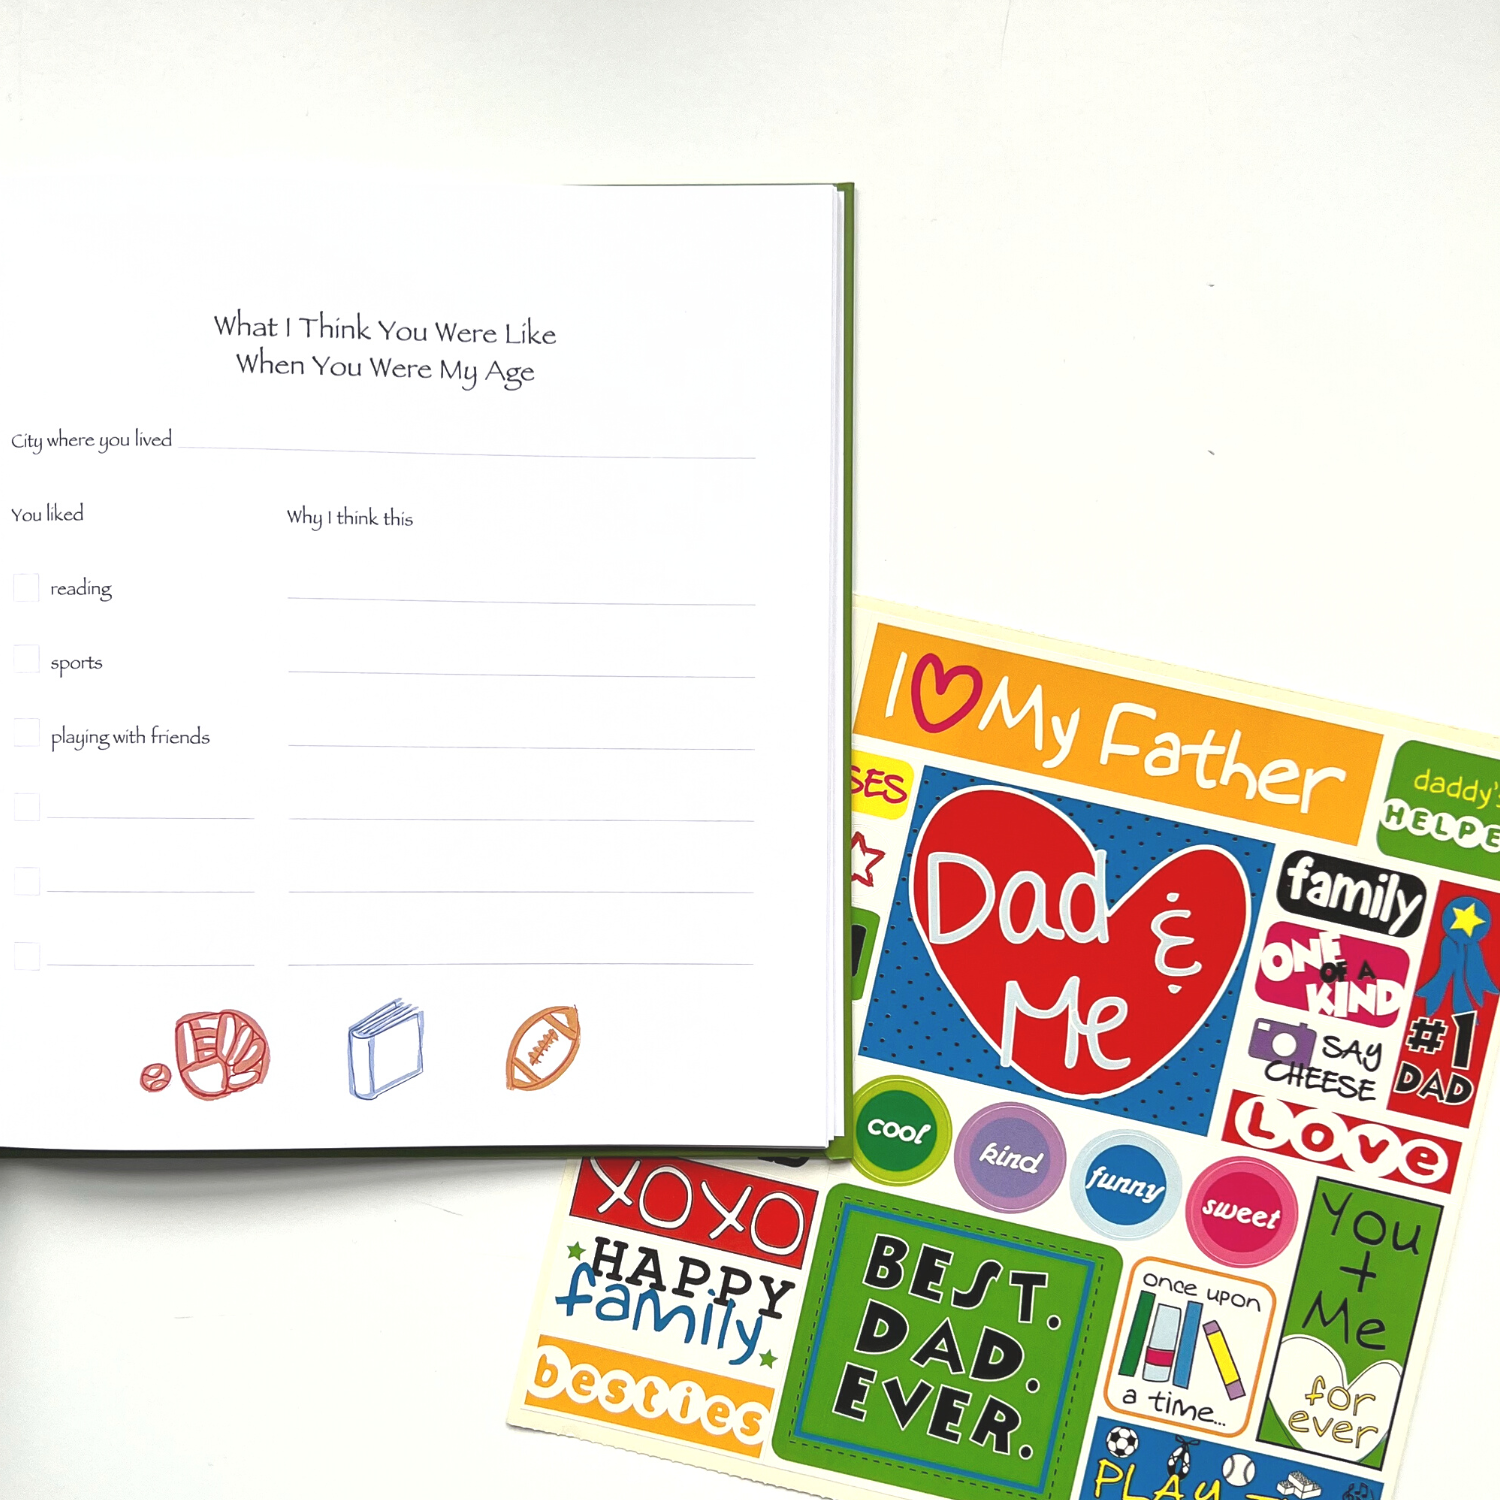 I Love You Dad Journal with open page and sticker sheet